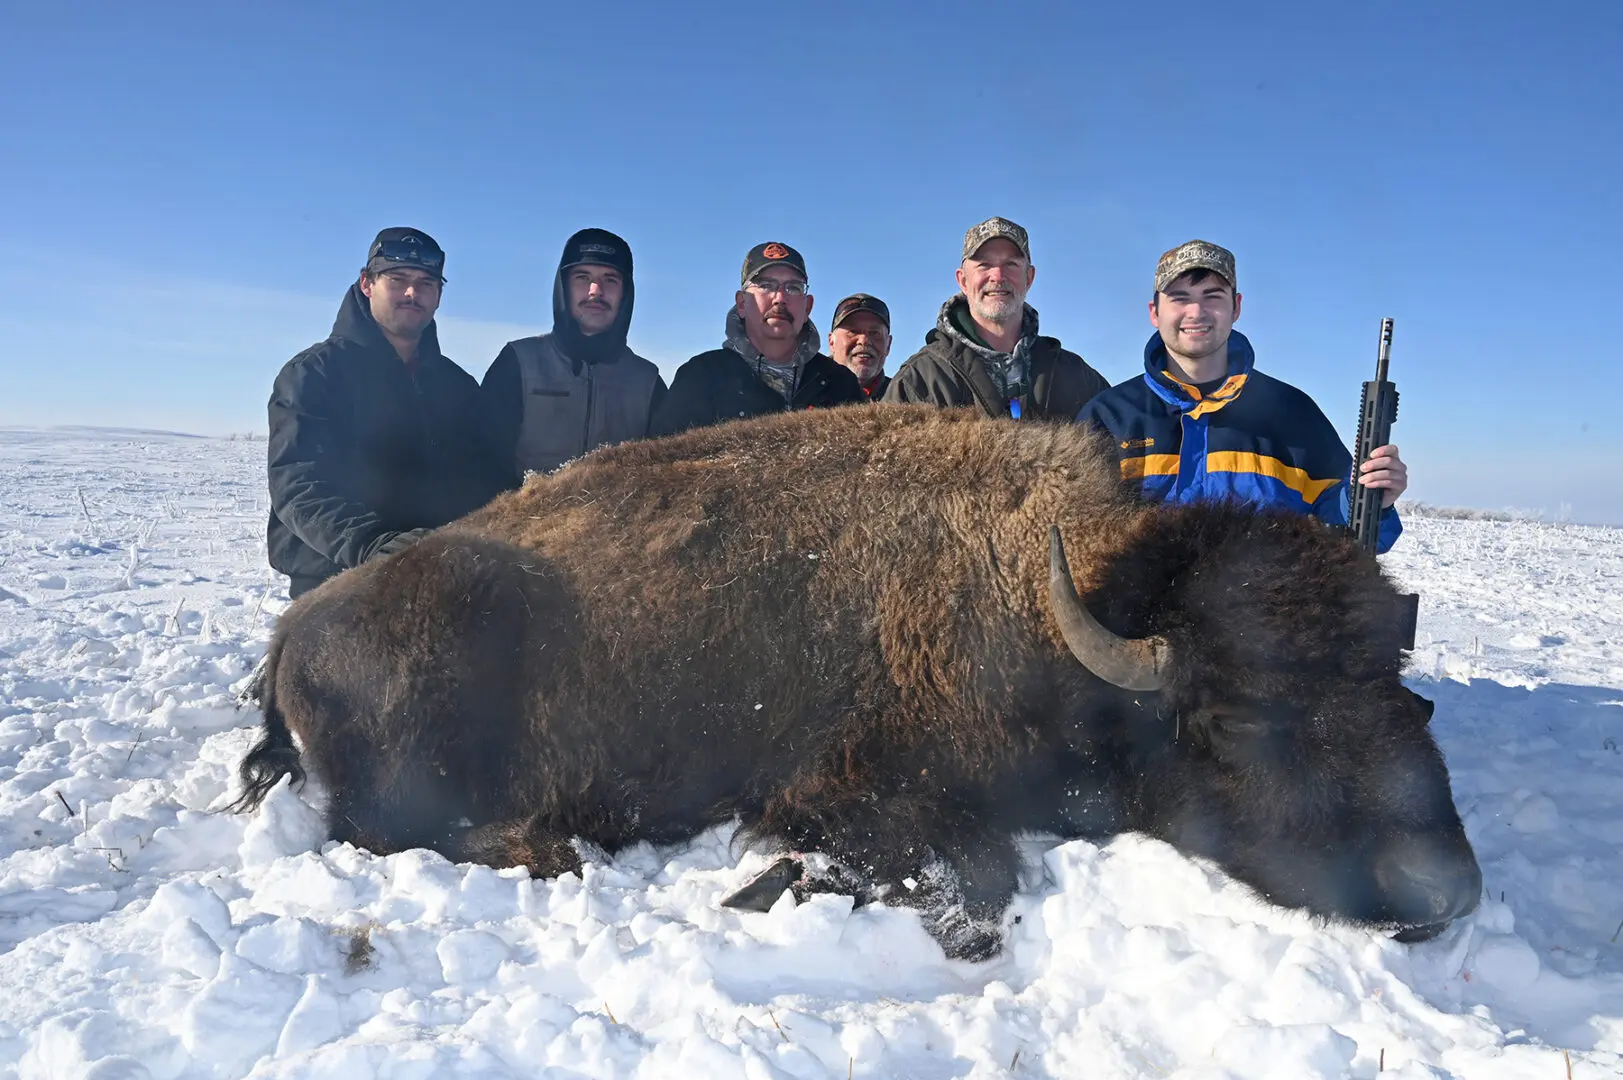 A group of men standing around a bison in the snow.